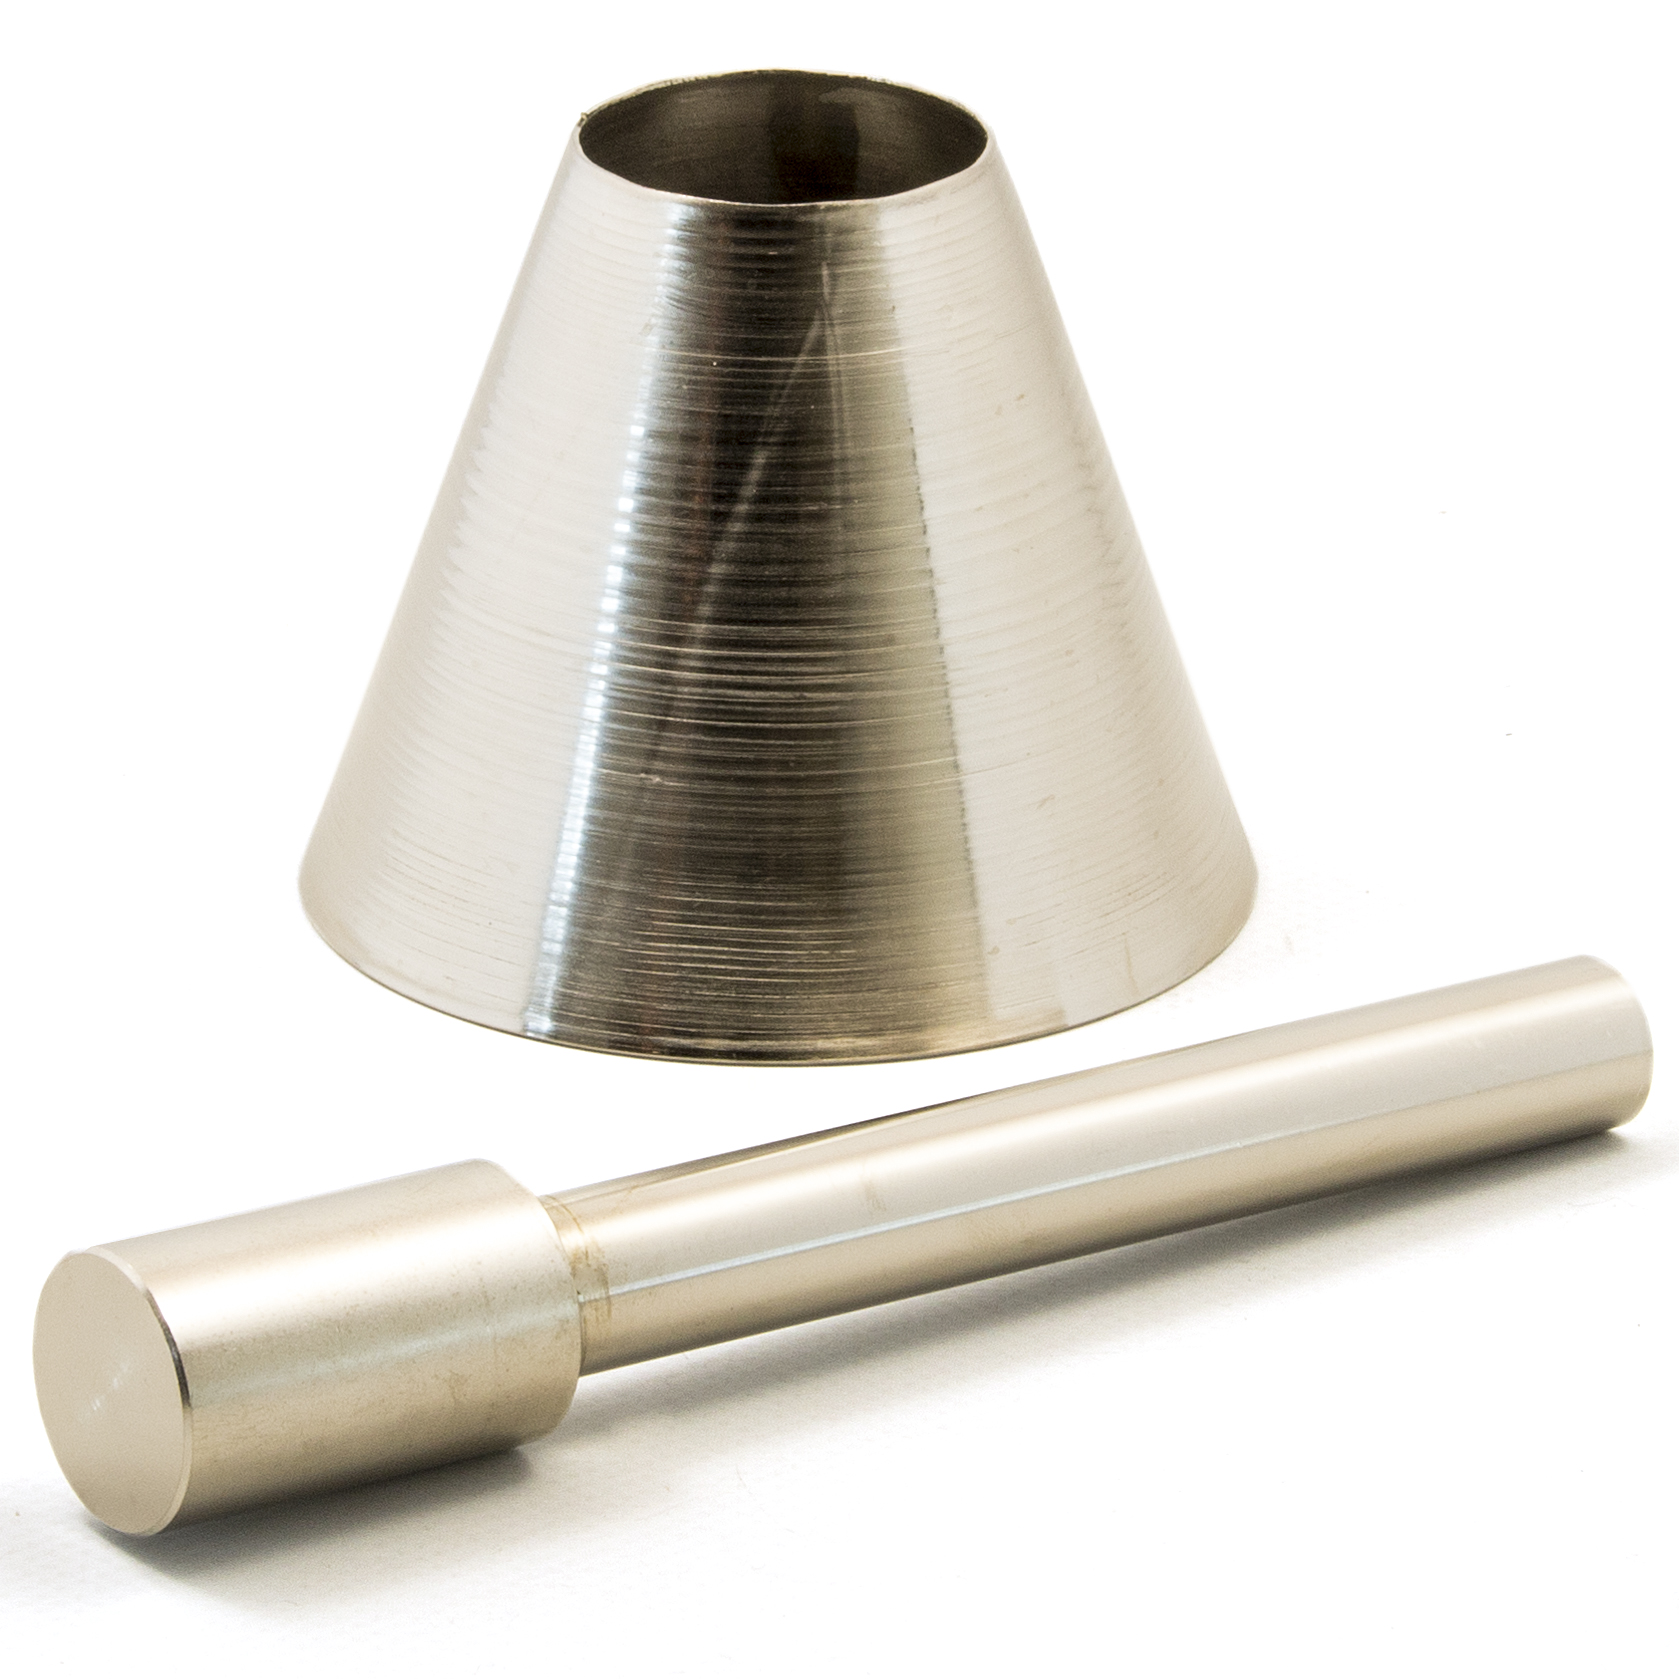 ABMB 5240200 Sand absorption cone and tamper T2402